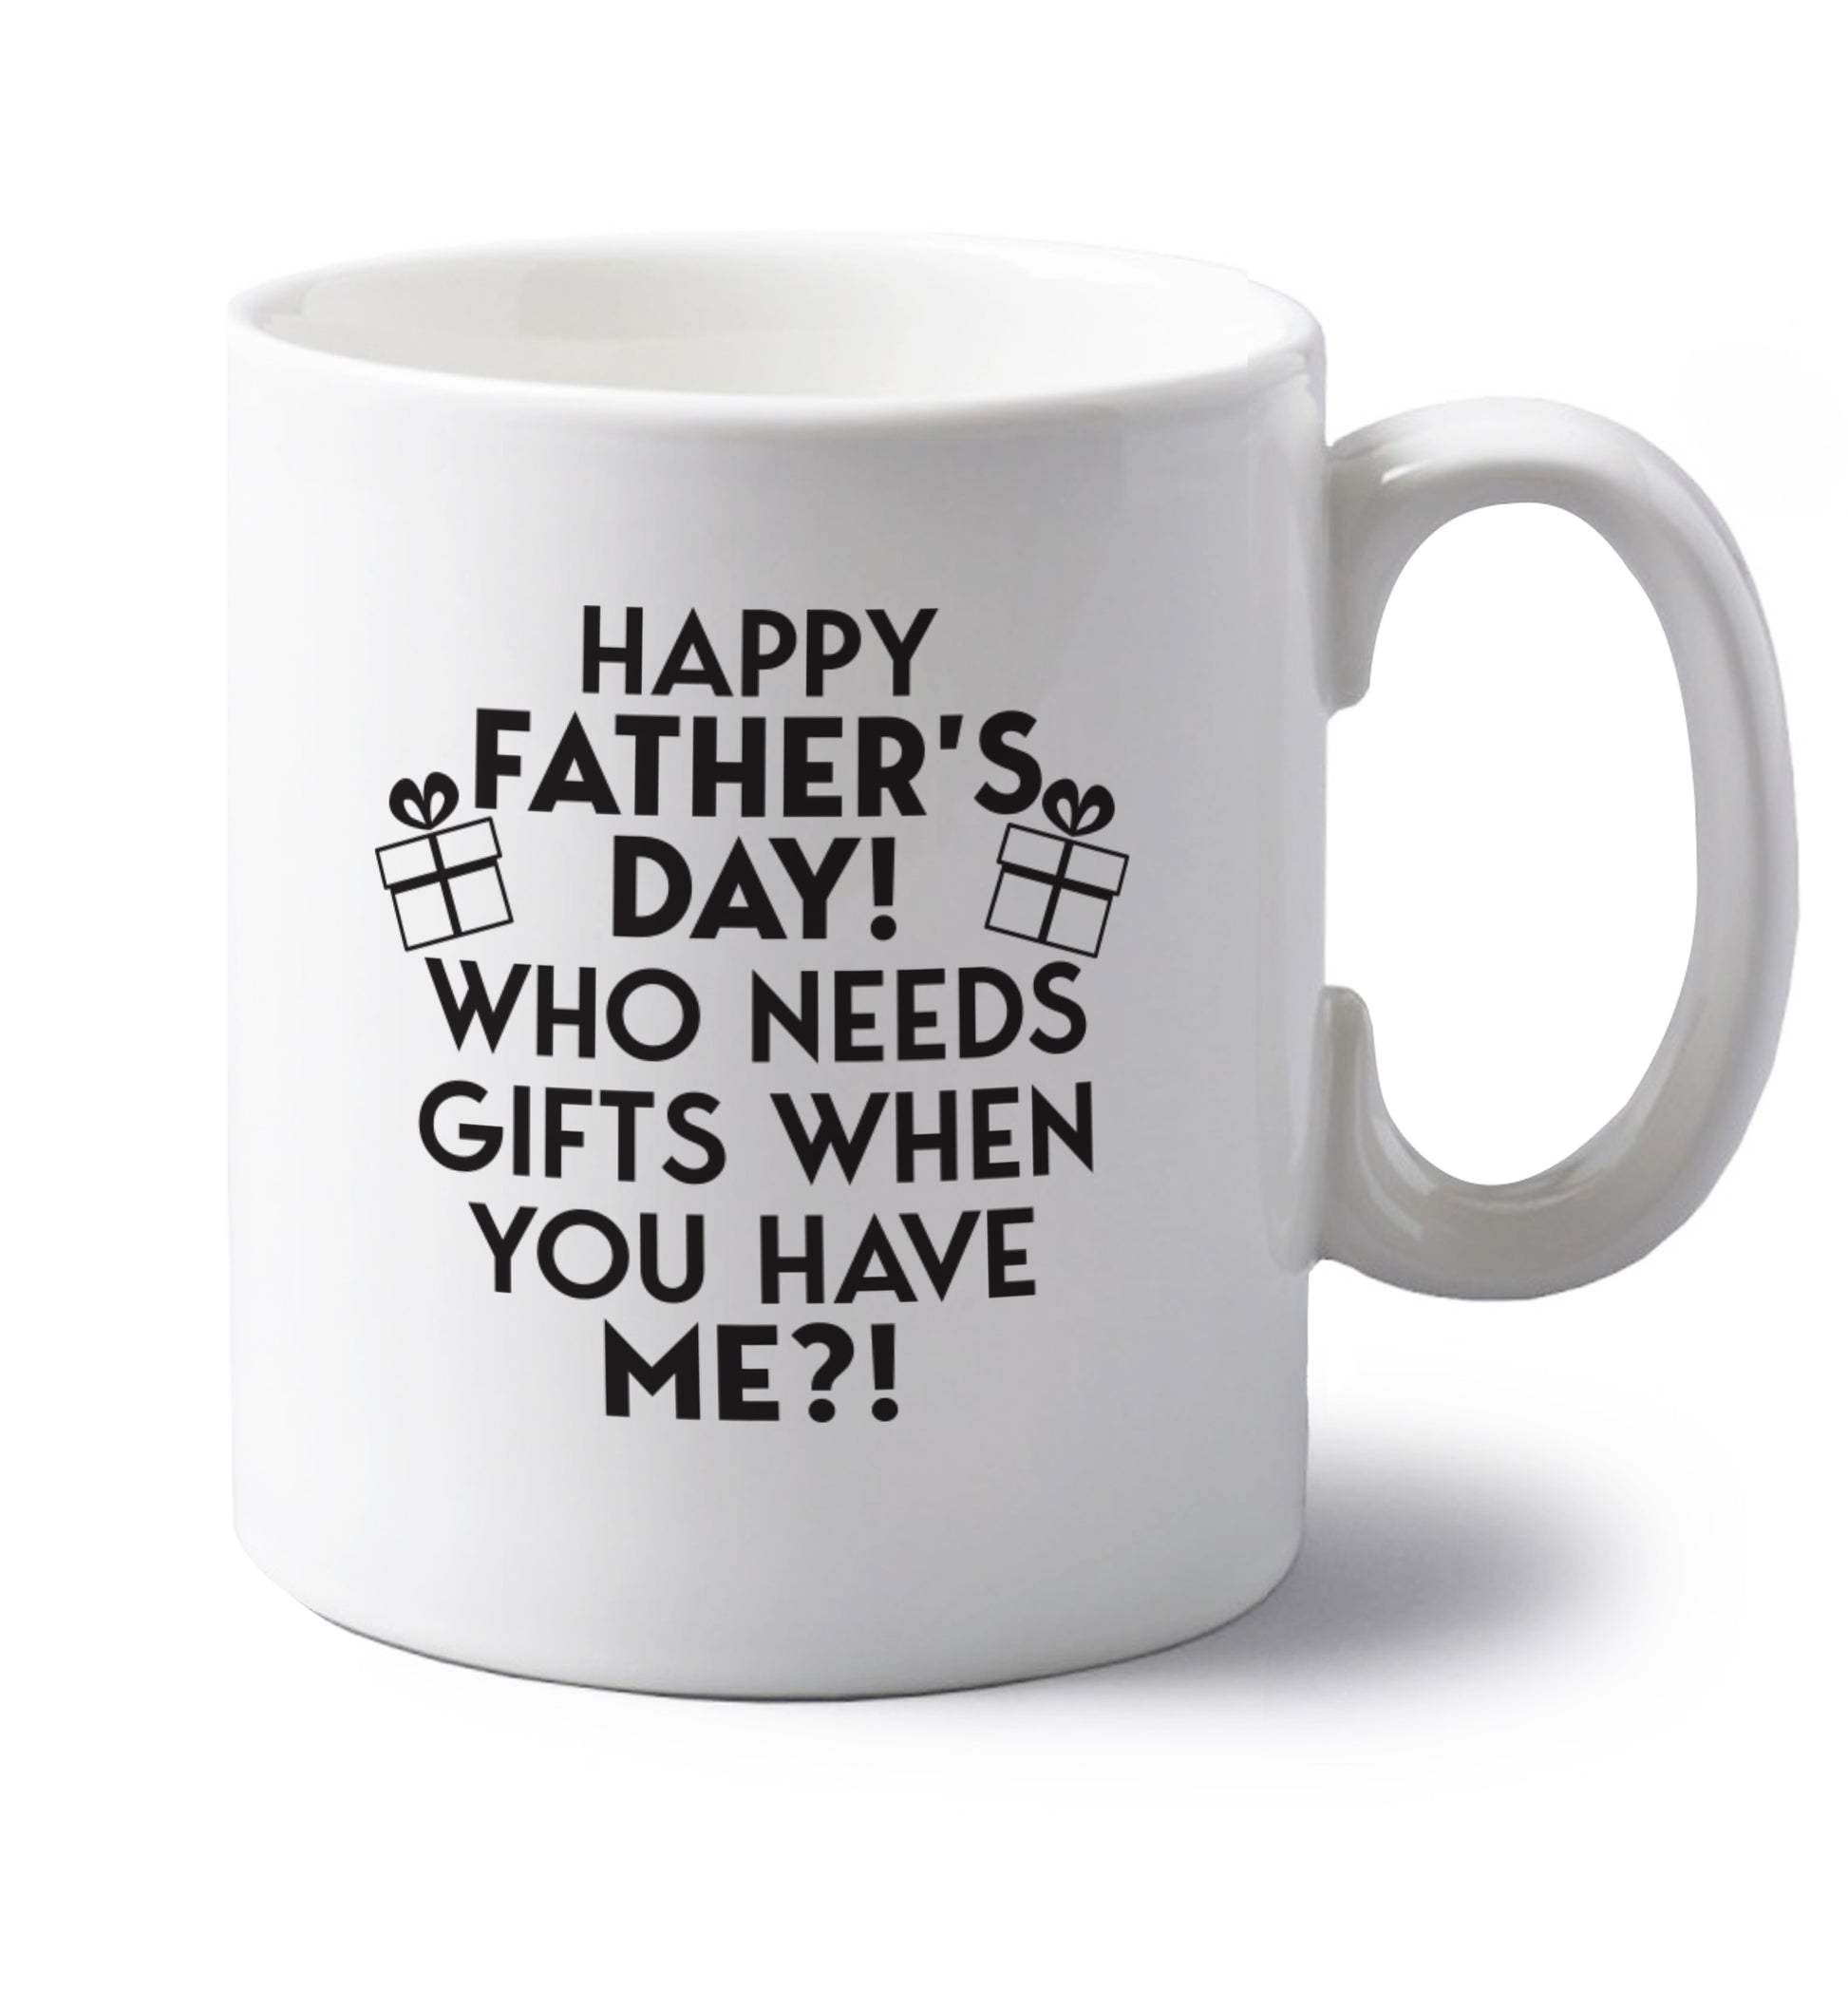 Happy Father's day, who needs a present when you have me left handed white ceramic mug 